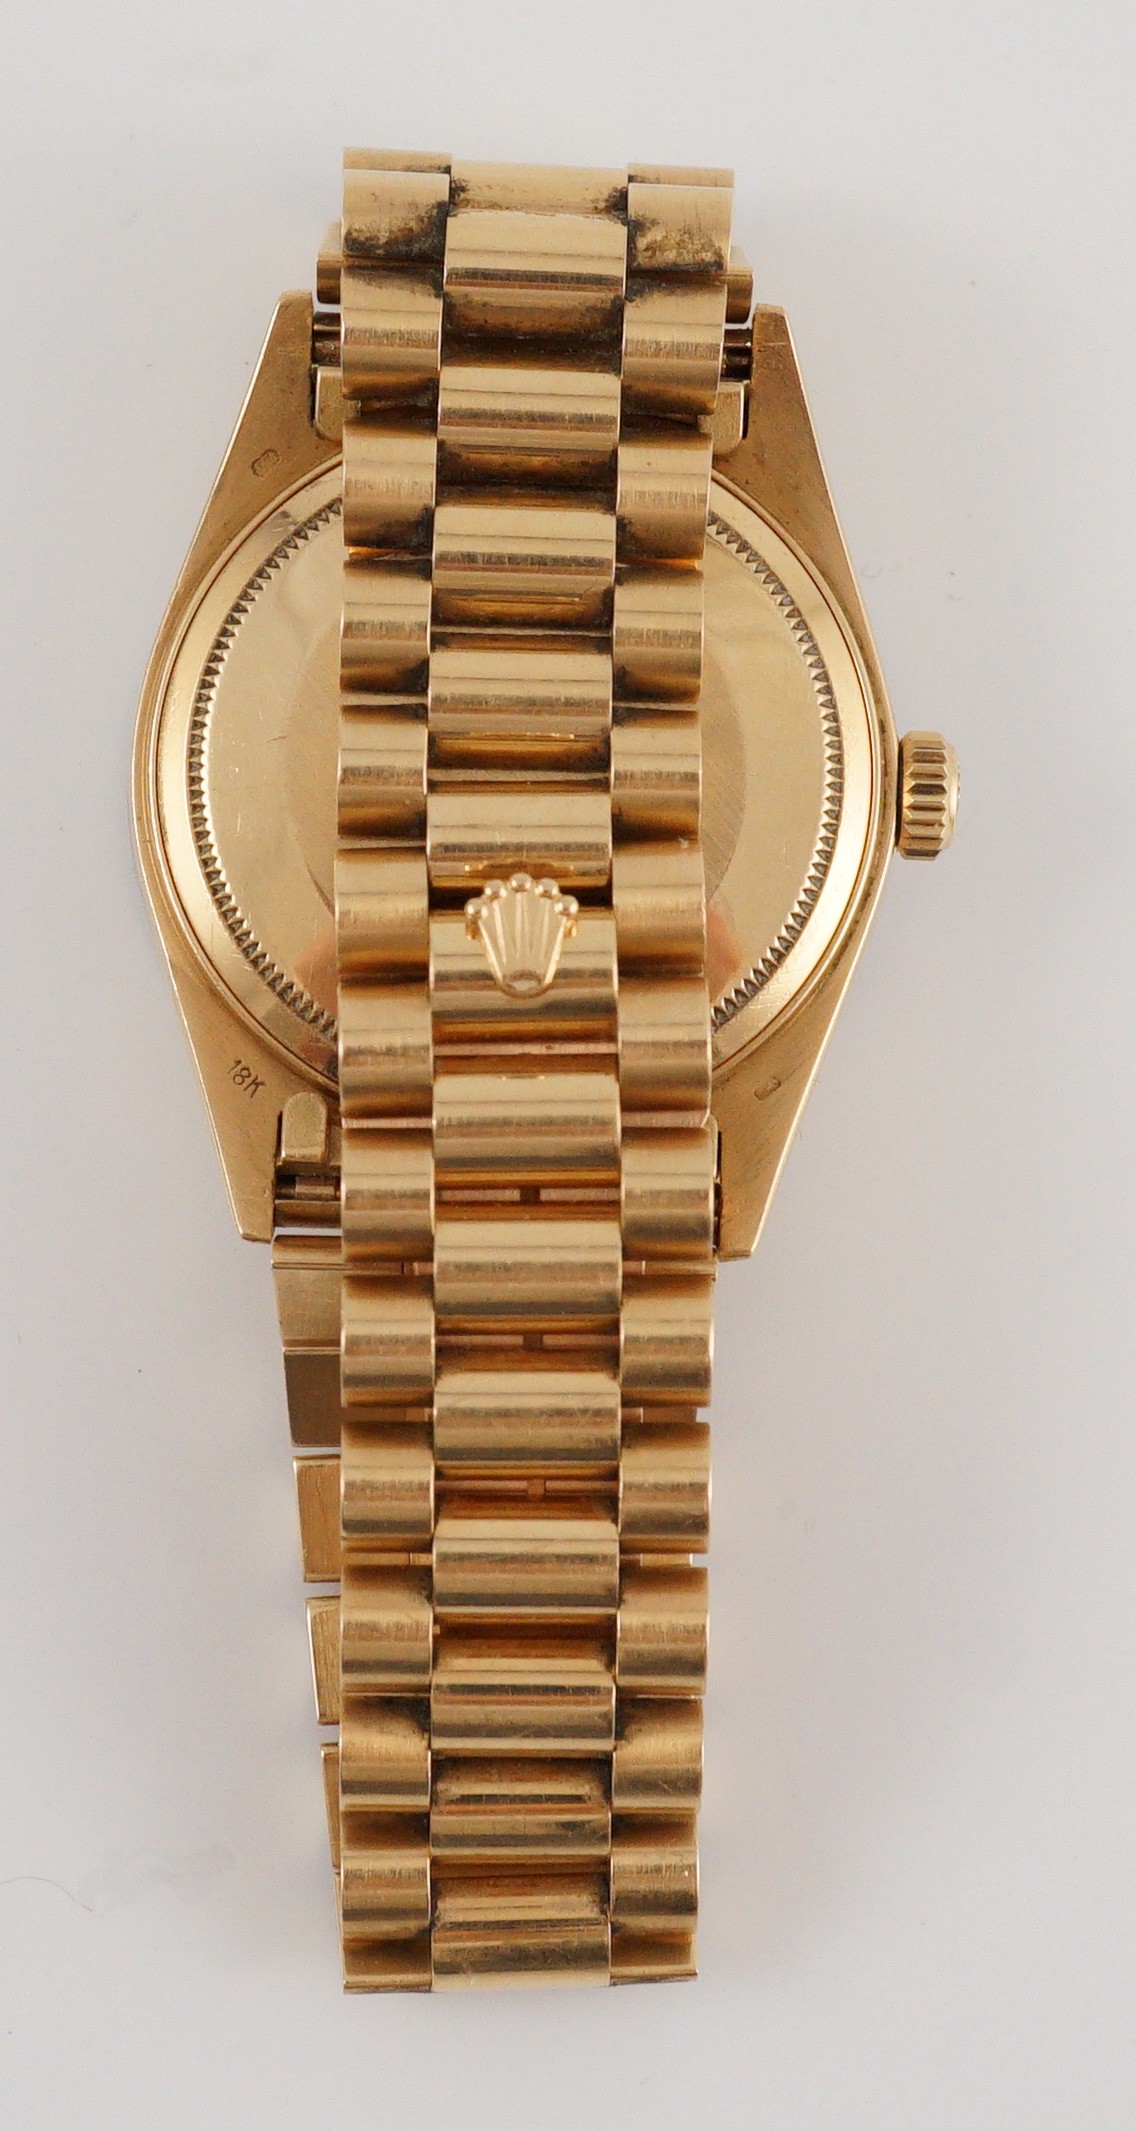 A gentleman's 1980's 18ct gold and diamond set Rolex Oyster Perpetual Day-Date wrist watch